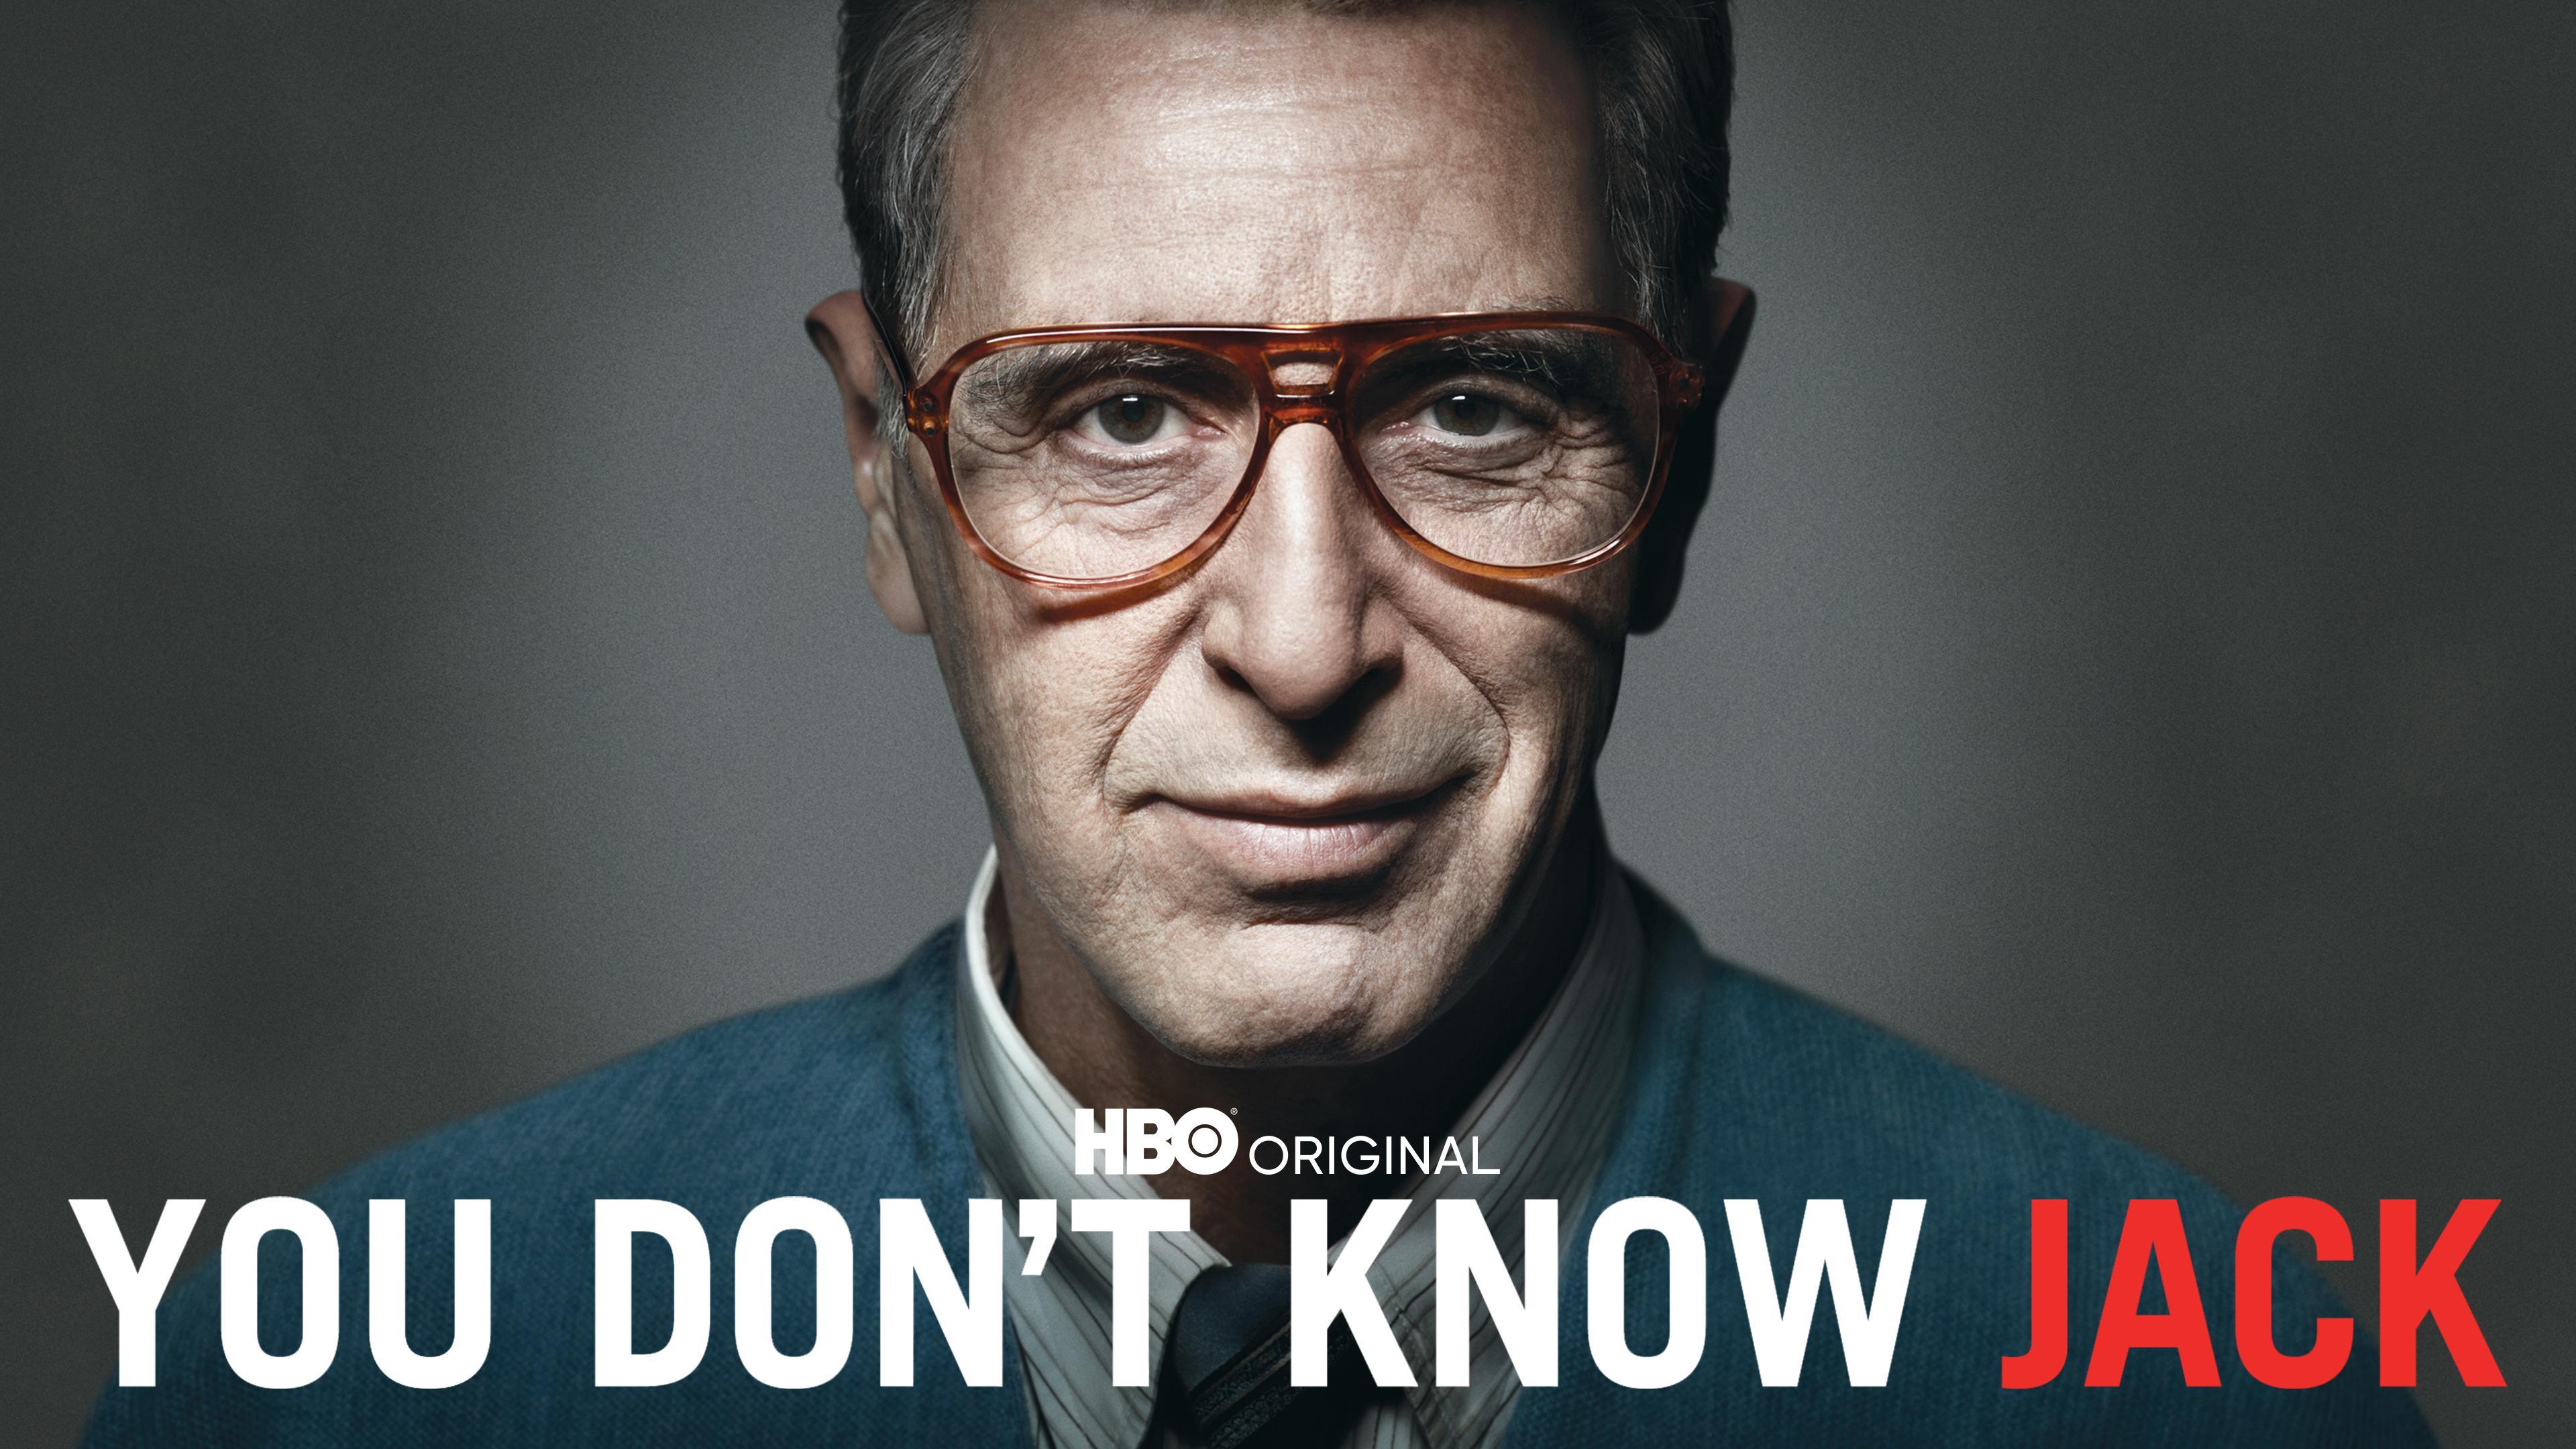 You Don't Know Jack | Watch the Movie on HBO | HBO.com